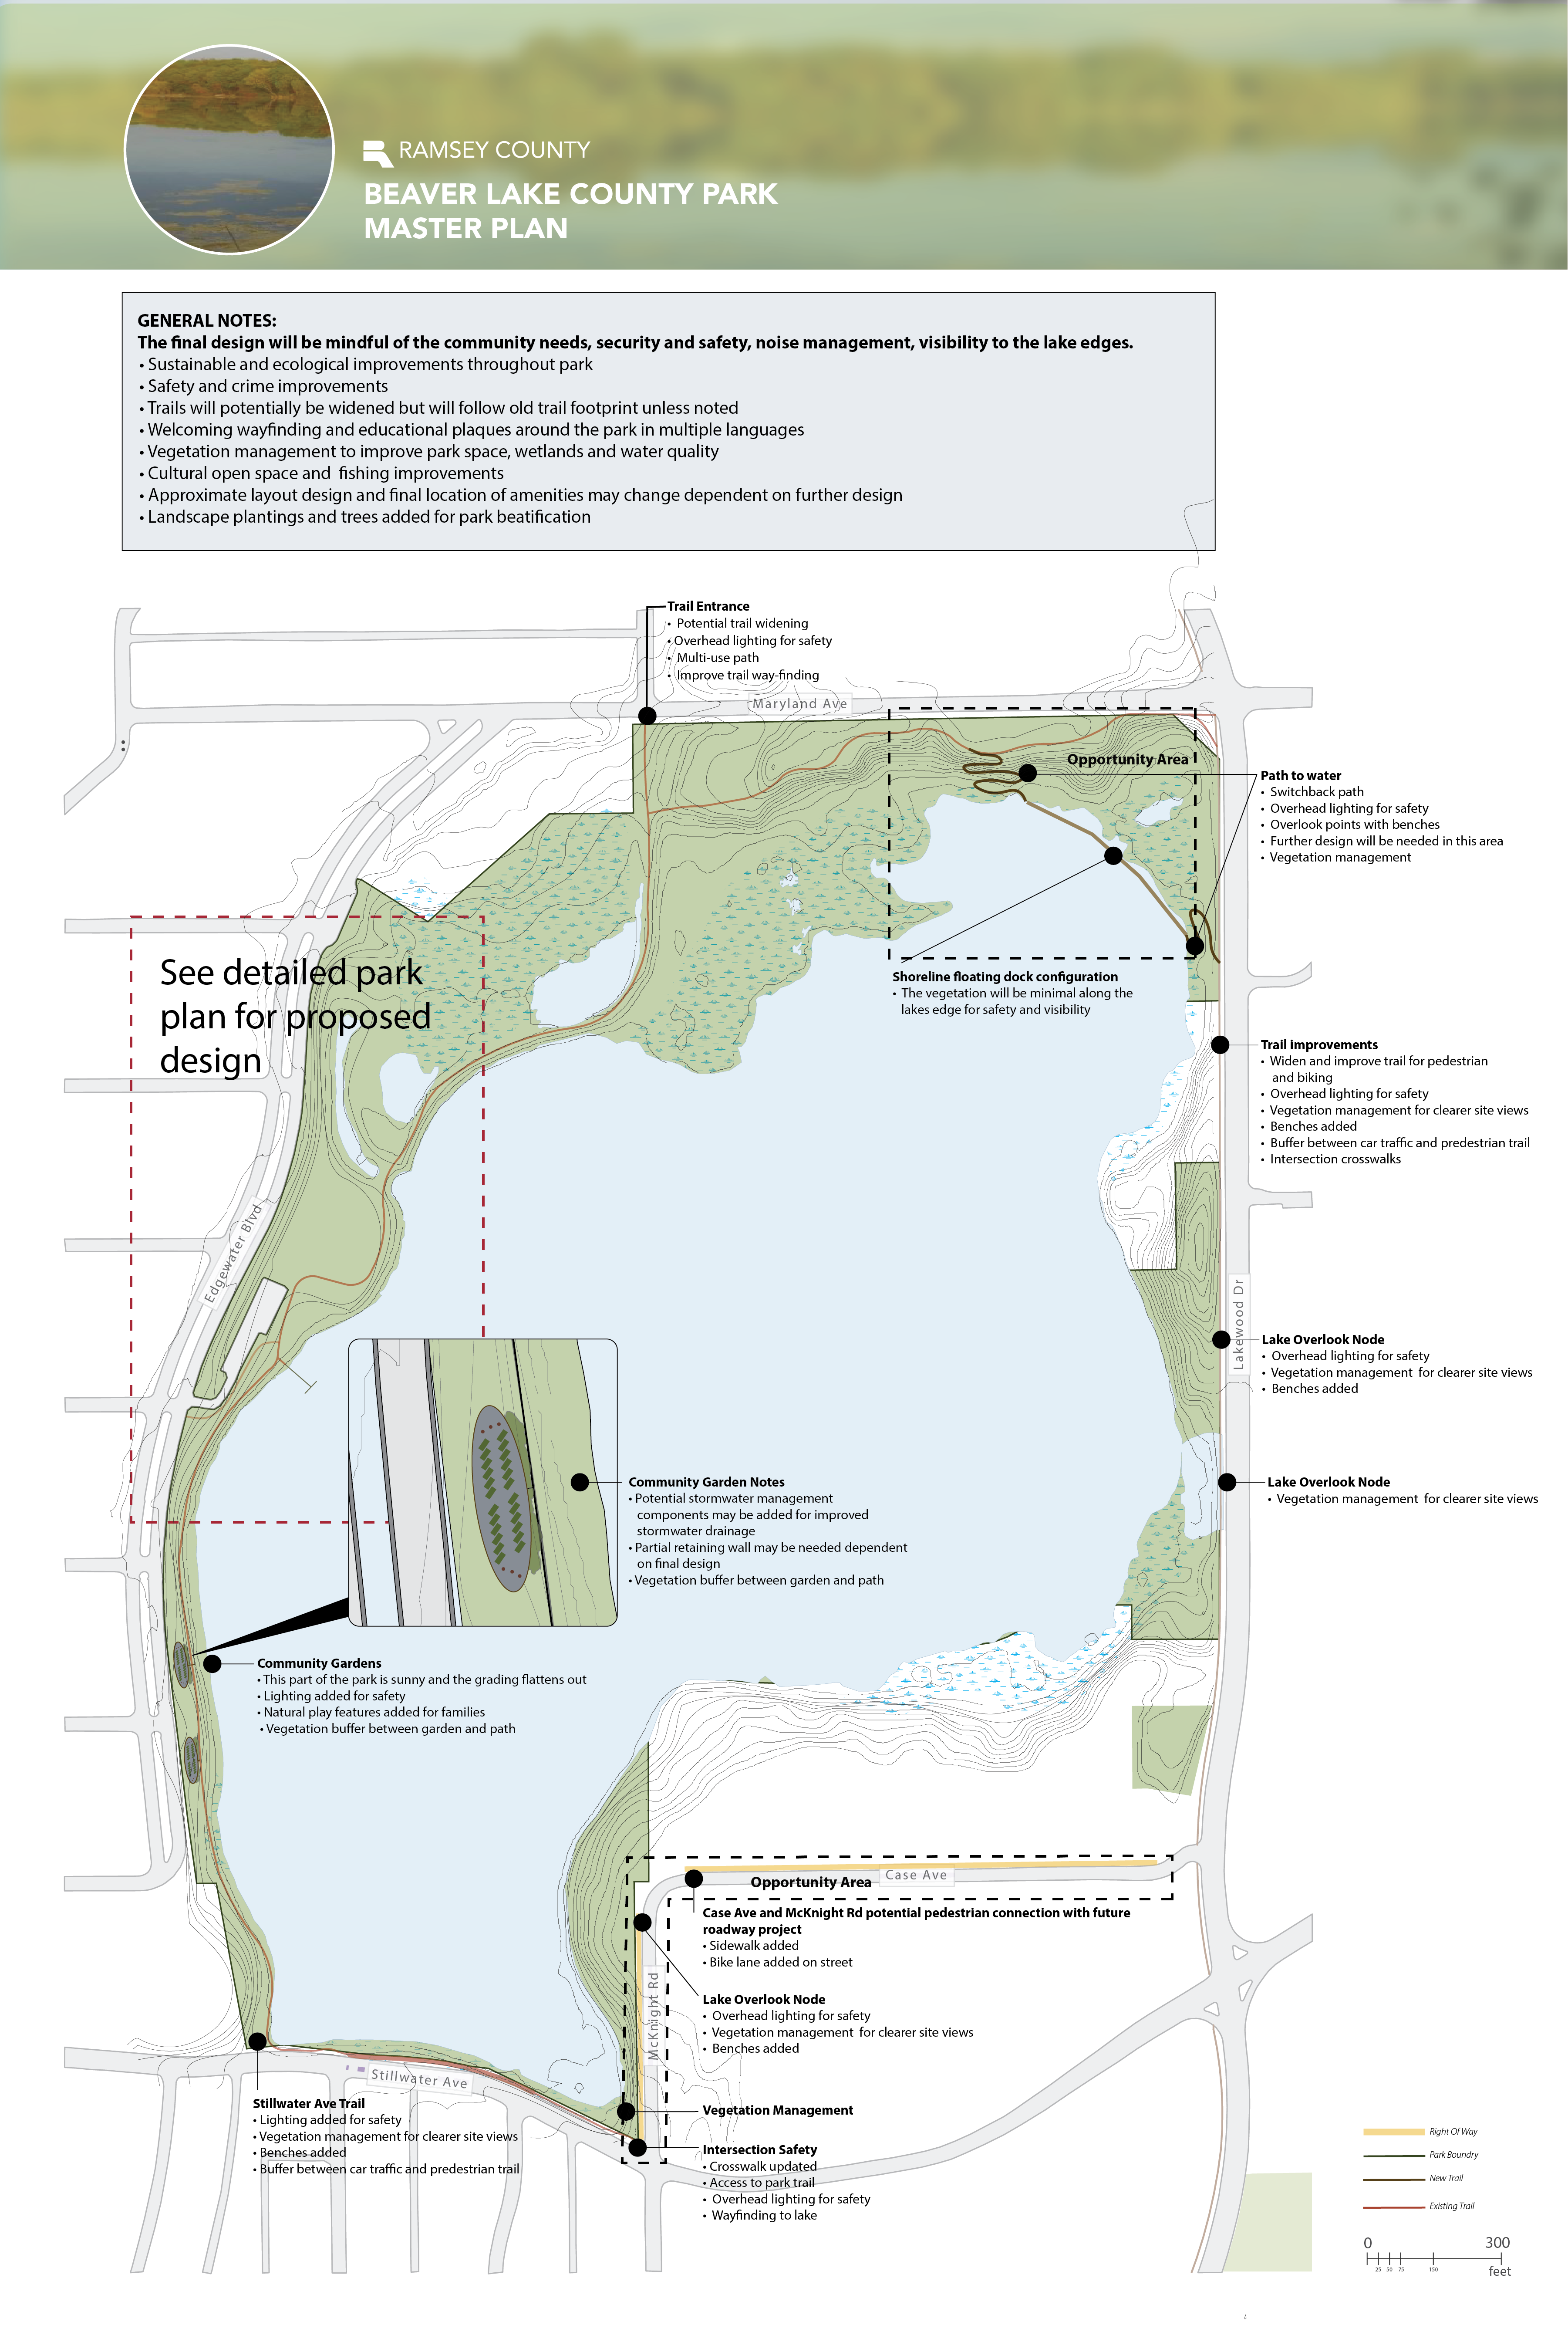 Park map displaying proposed master plan concepts